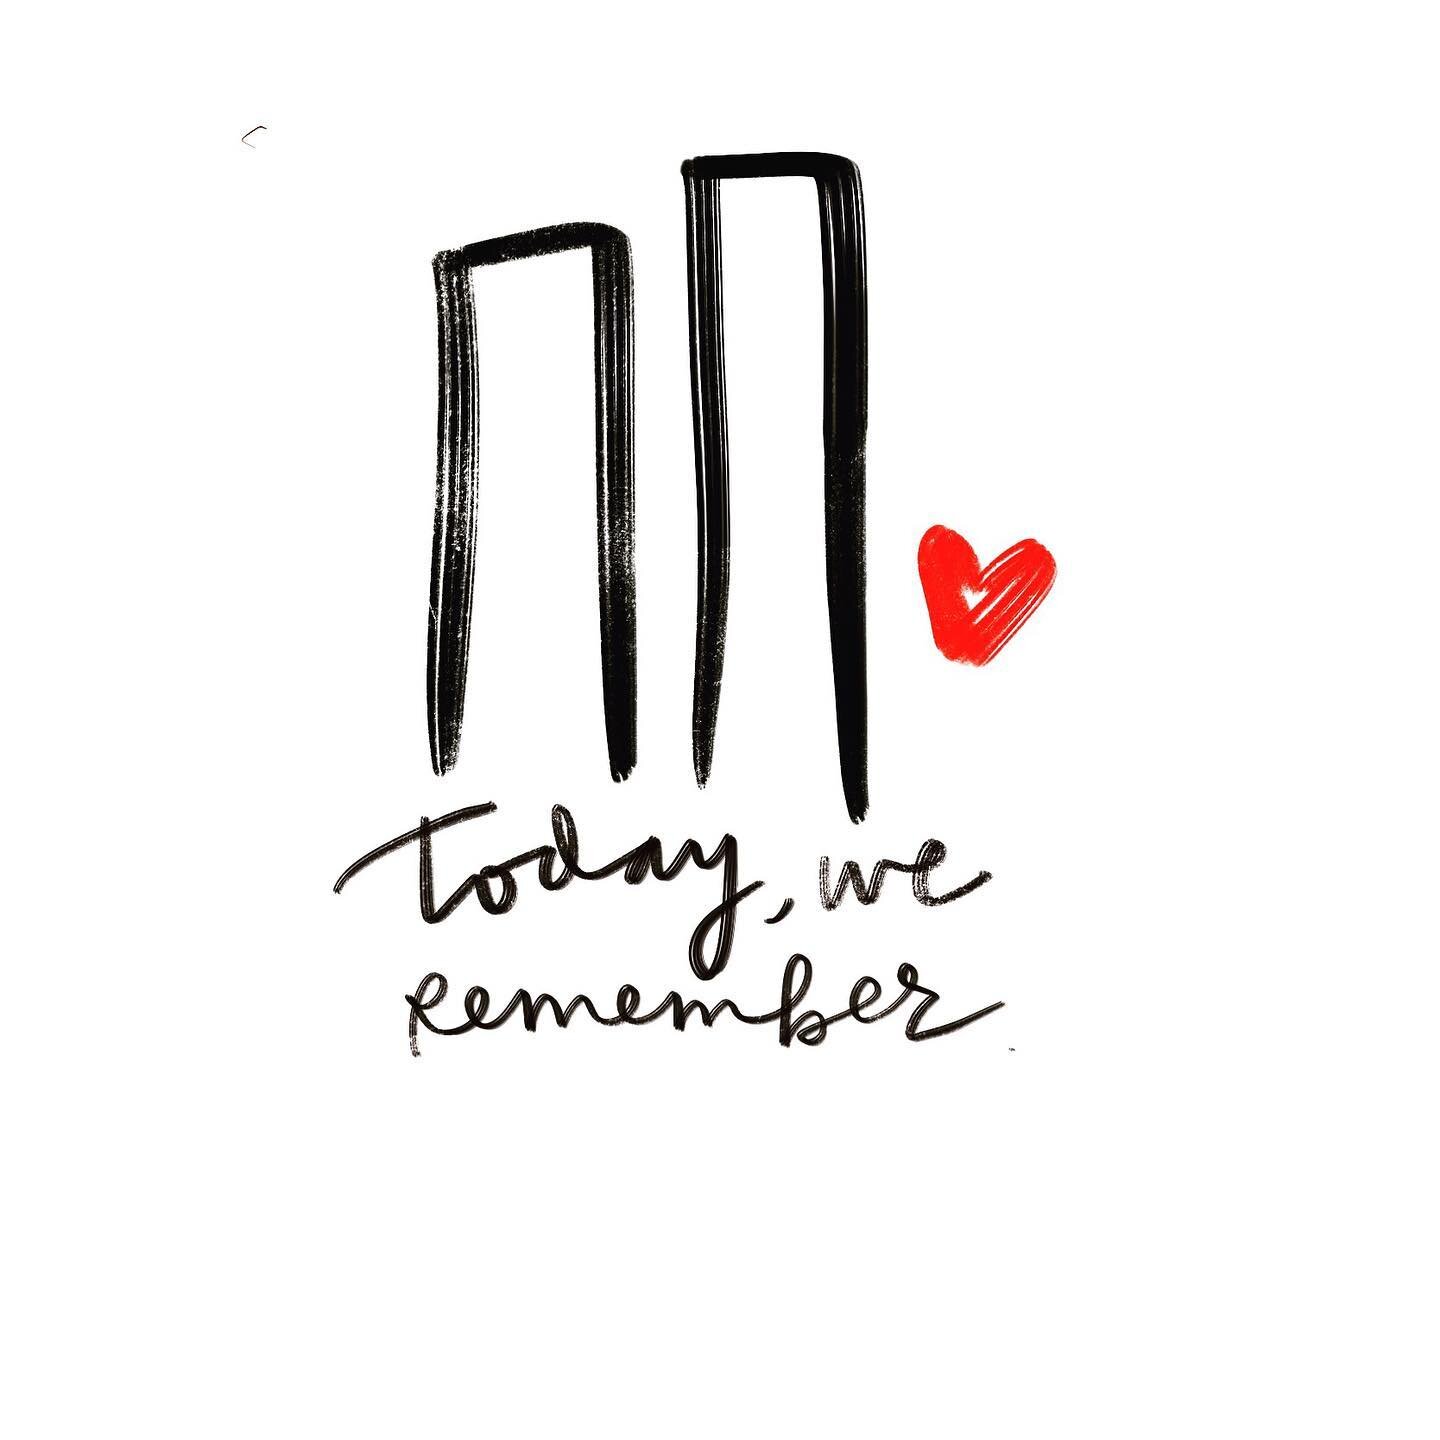 Hard to believe it&rsquo;s been 19 years. 
Always remember, never forget. &hearts;️
.
.
.
.
.
#newyorkcity #911 #twintowers #loveislouderthanhate #remember #doodlesofinstagram